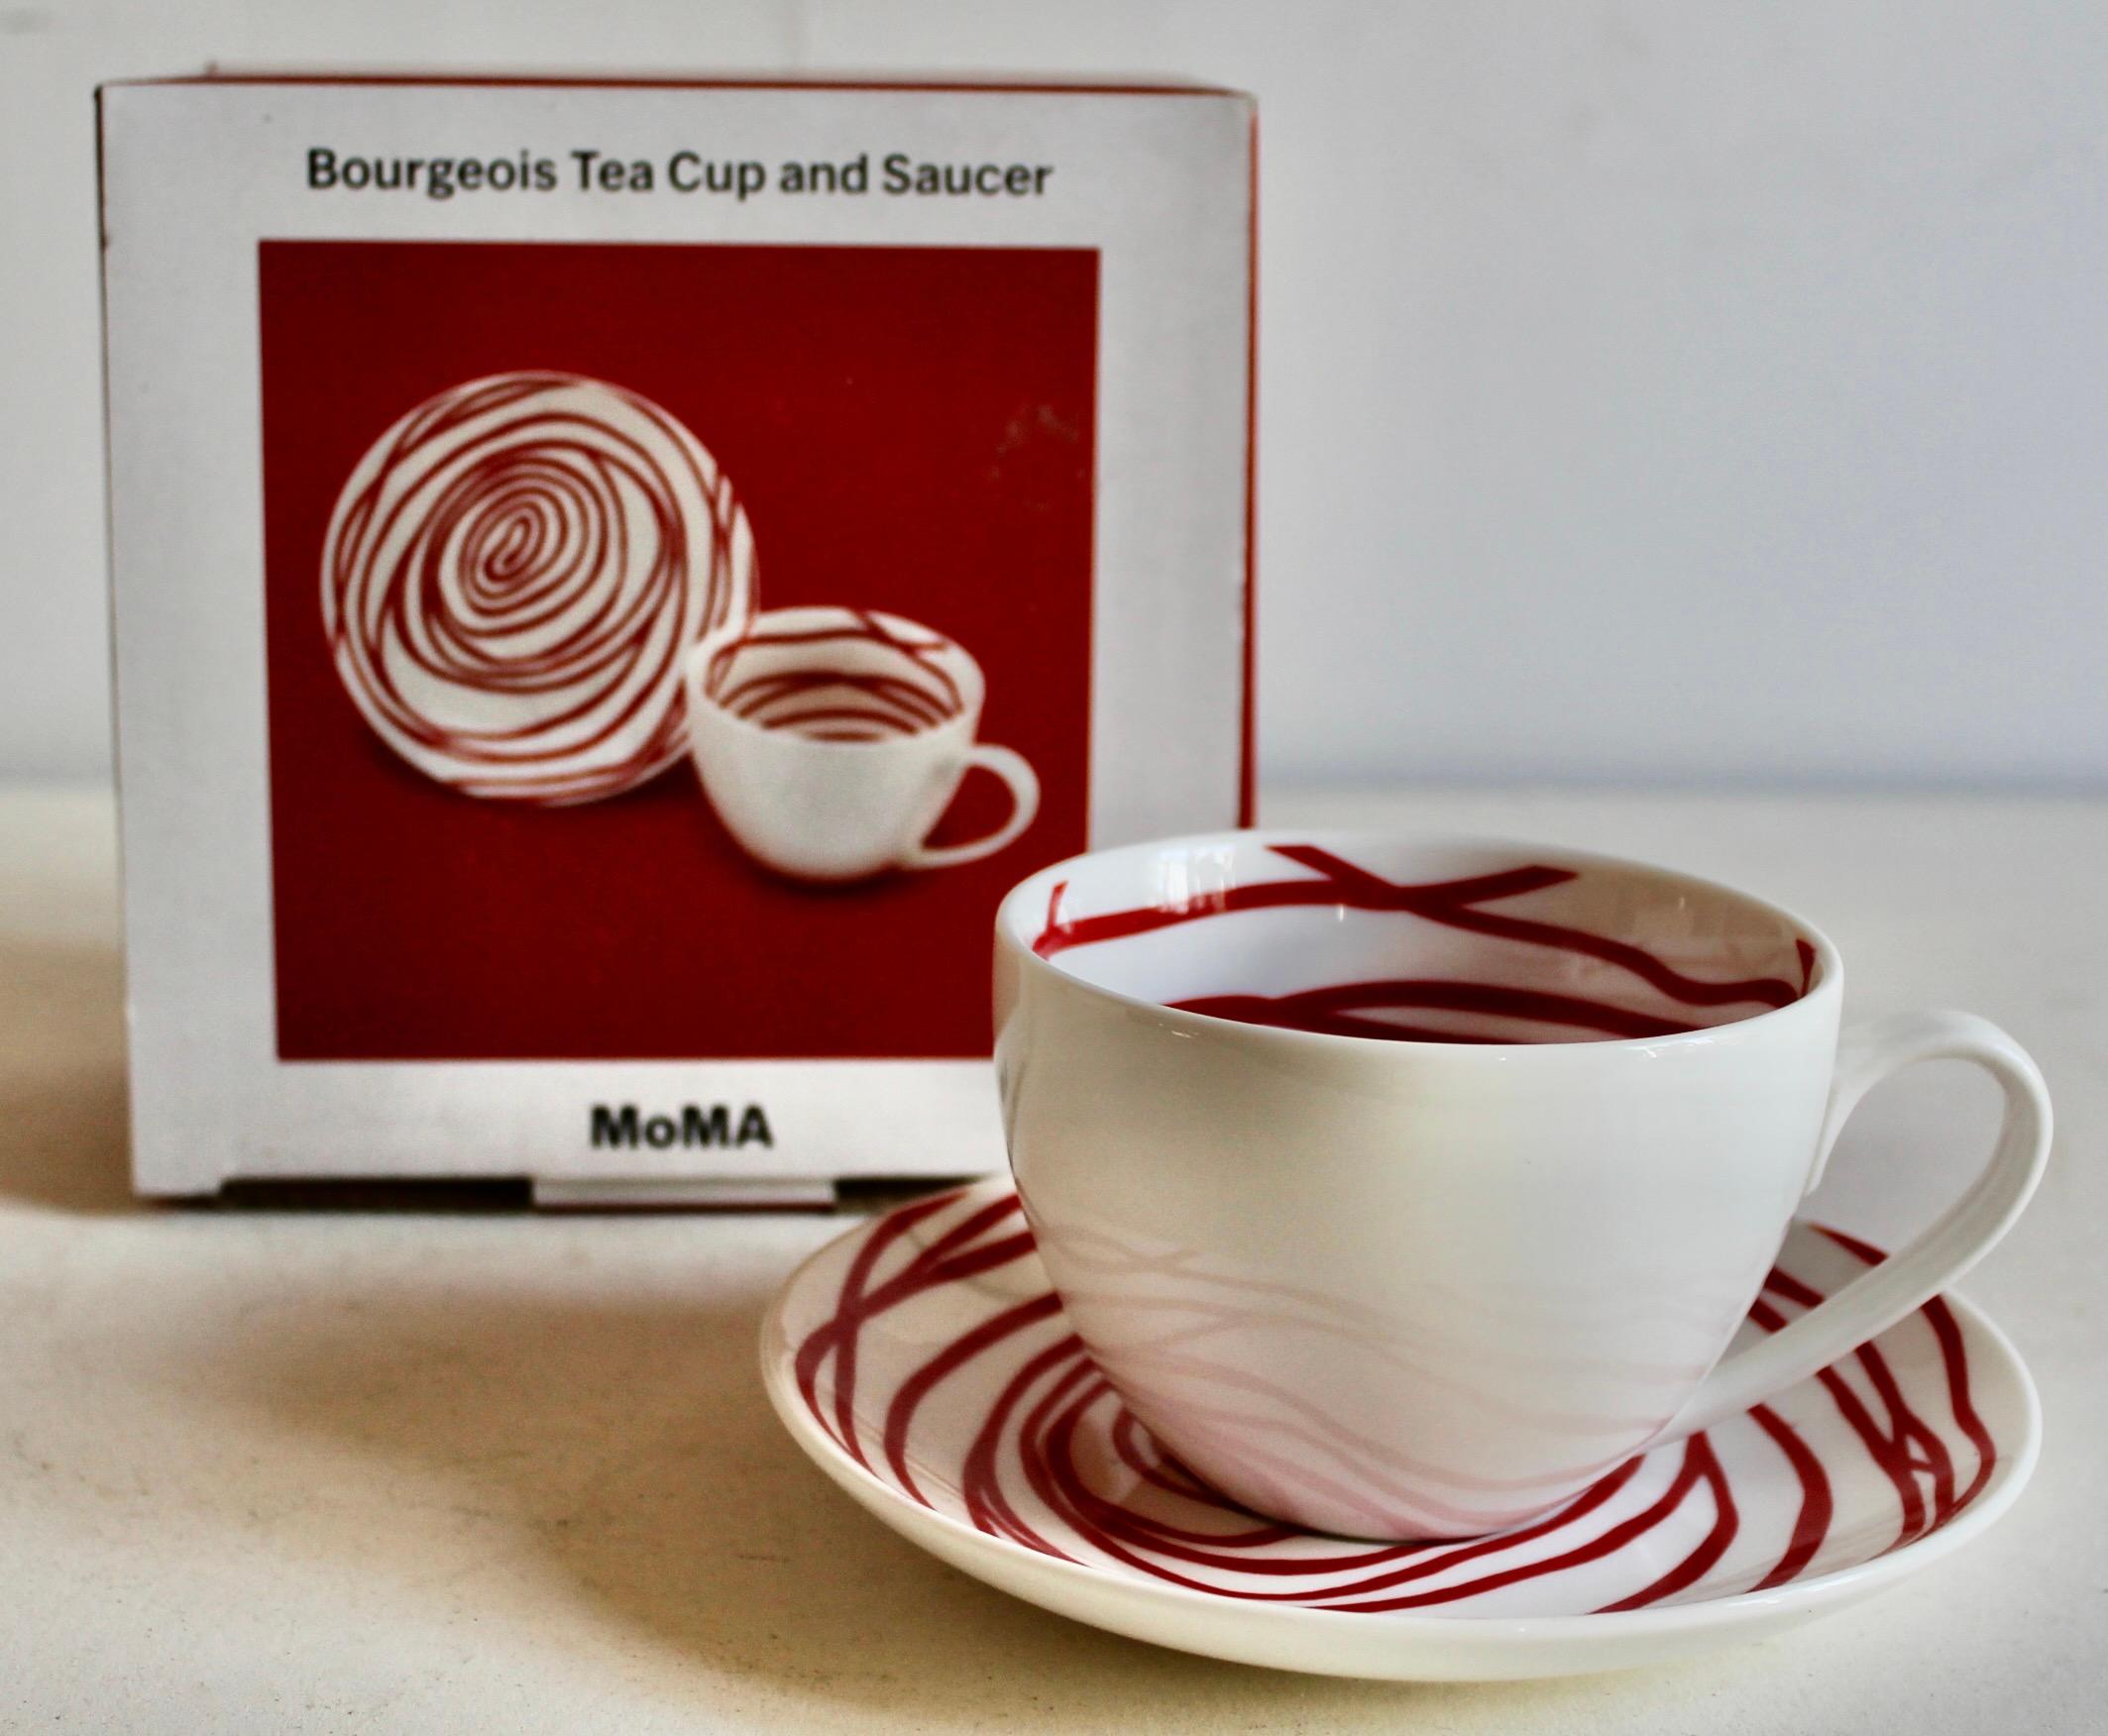 Louise Bourgeois Cup and Saucer in its original Museum of Modern Art box.